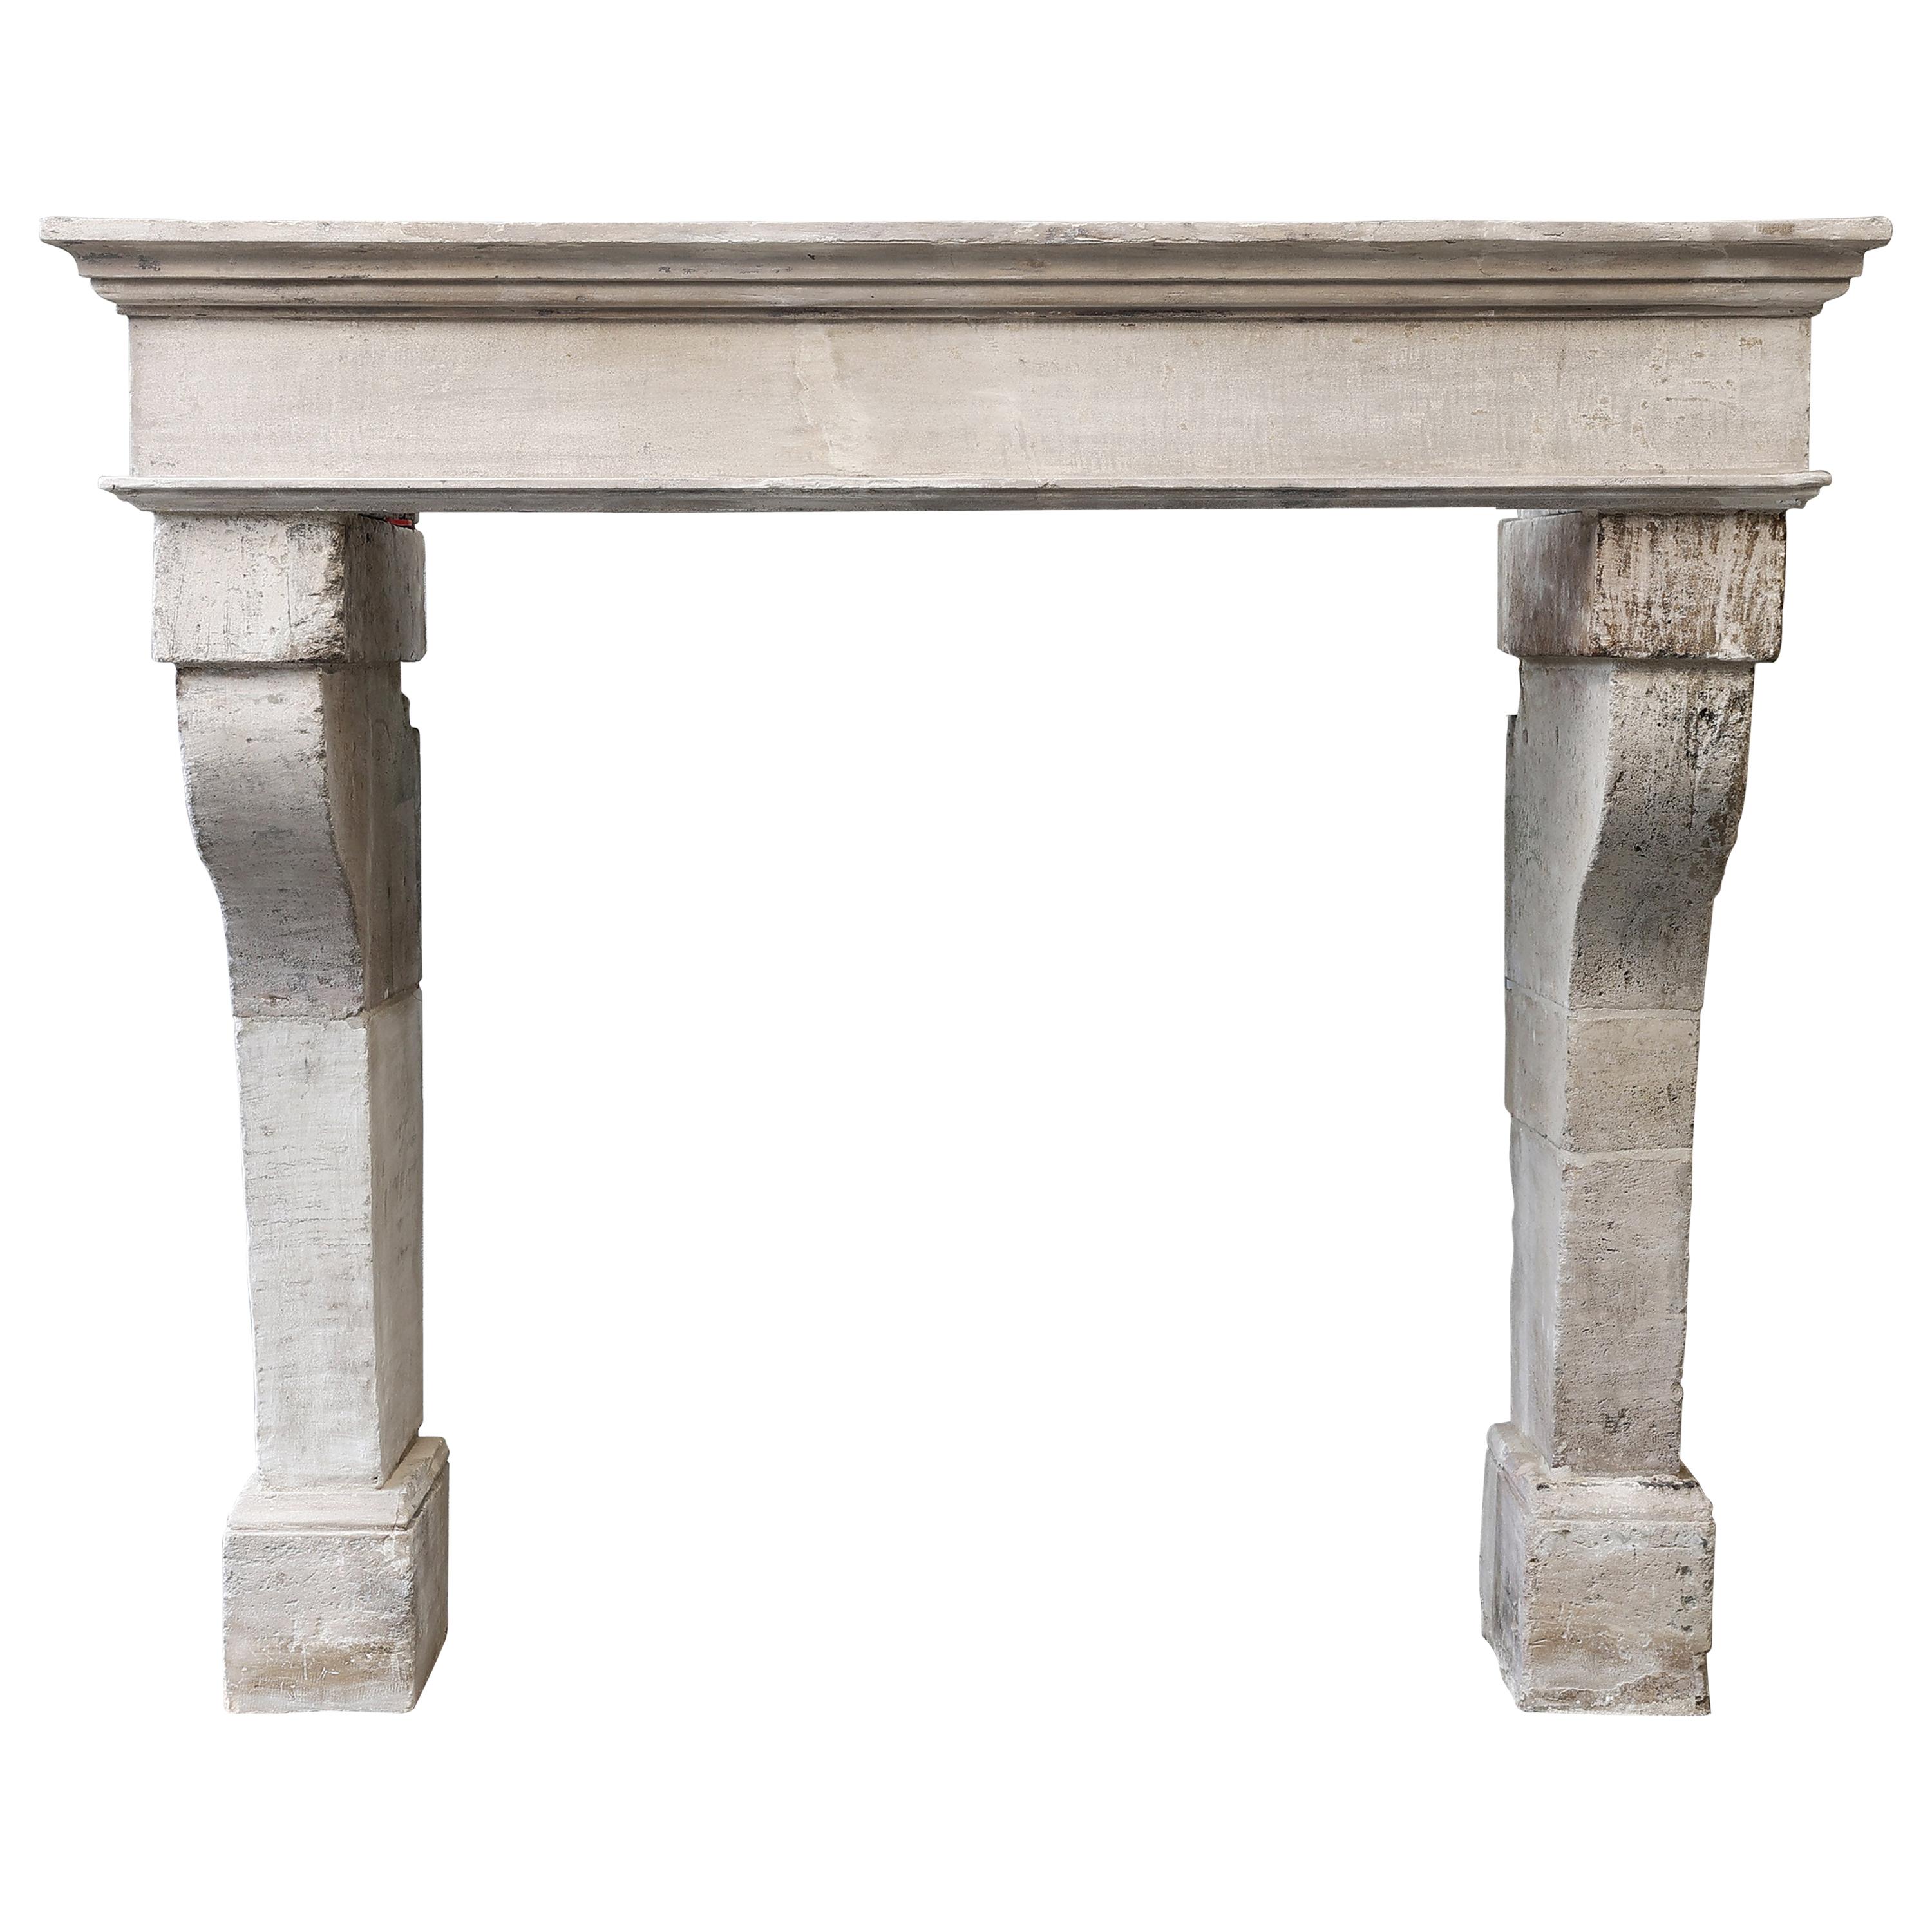 Campagnarde Style Mantel from the 19th Century of French Limestone